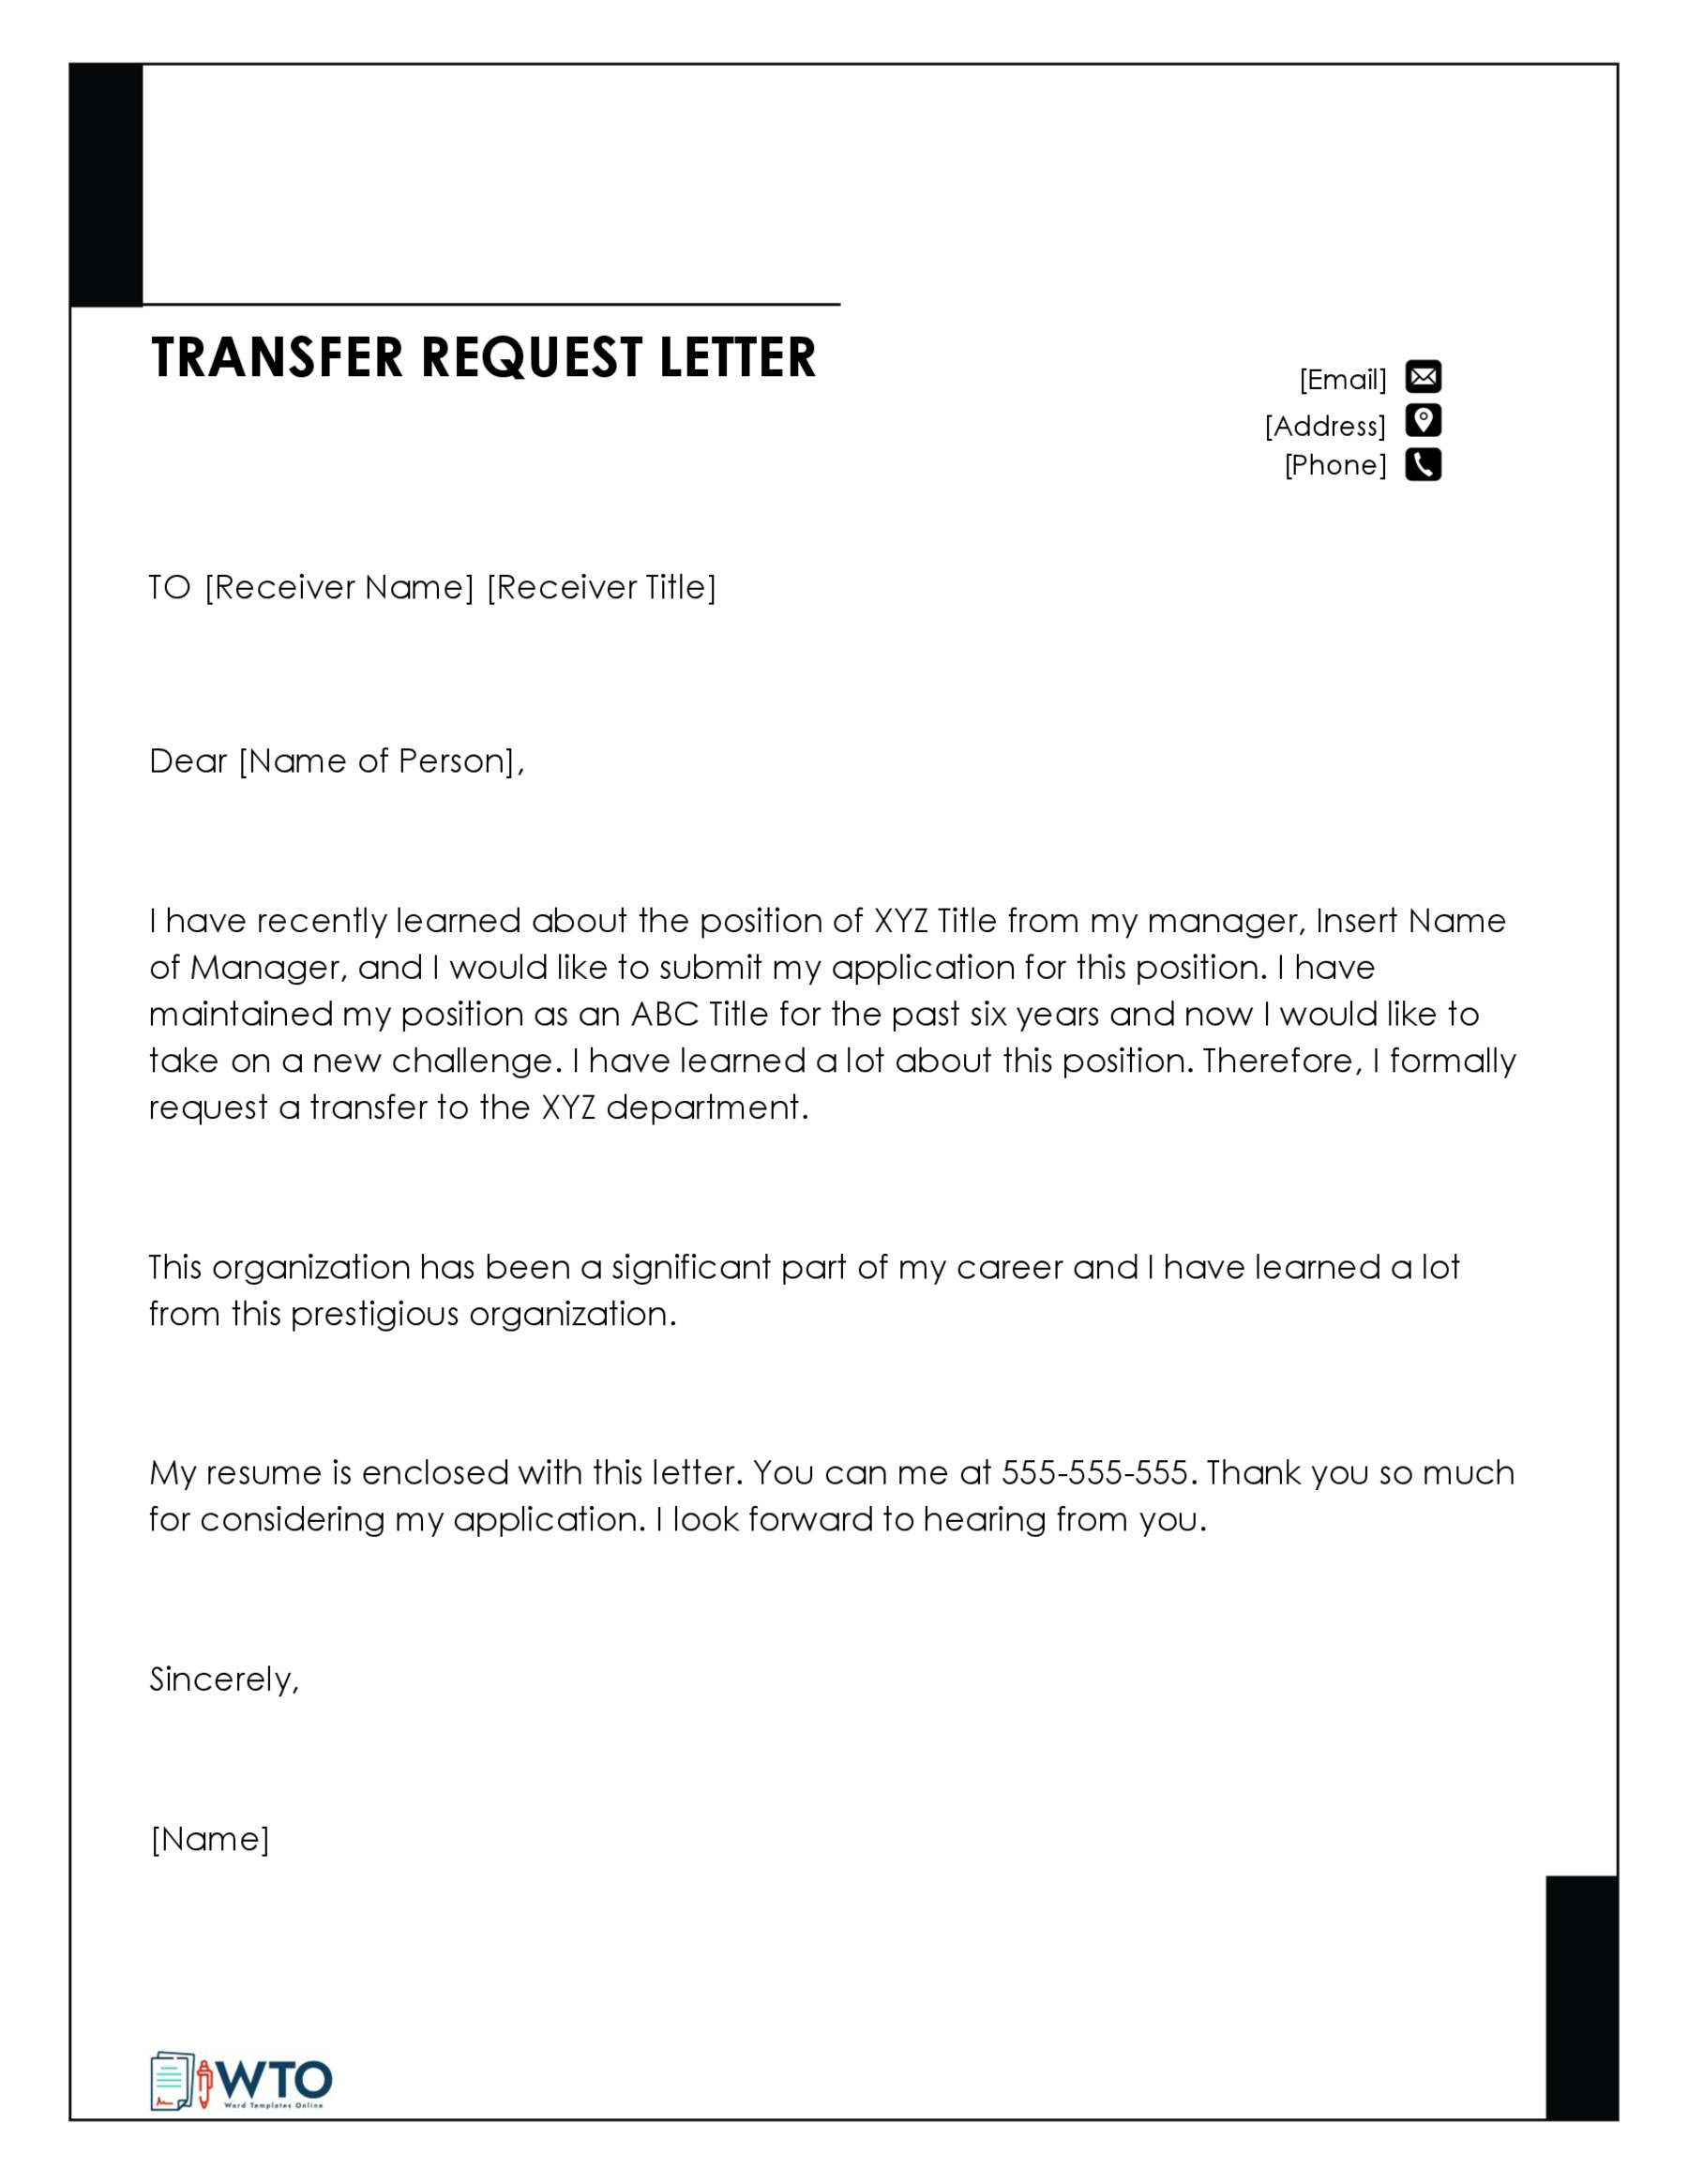 Free Printable Transfer Request Letter Sample 19 in Word Format